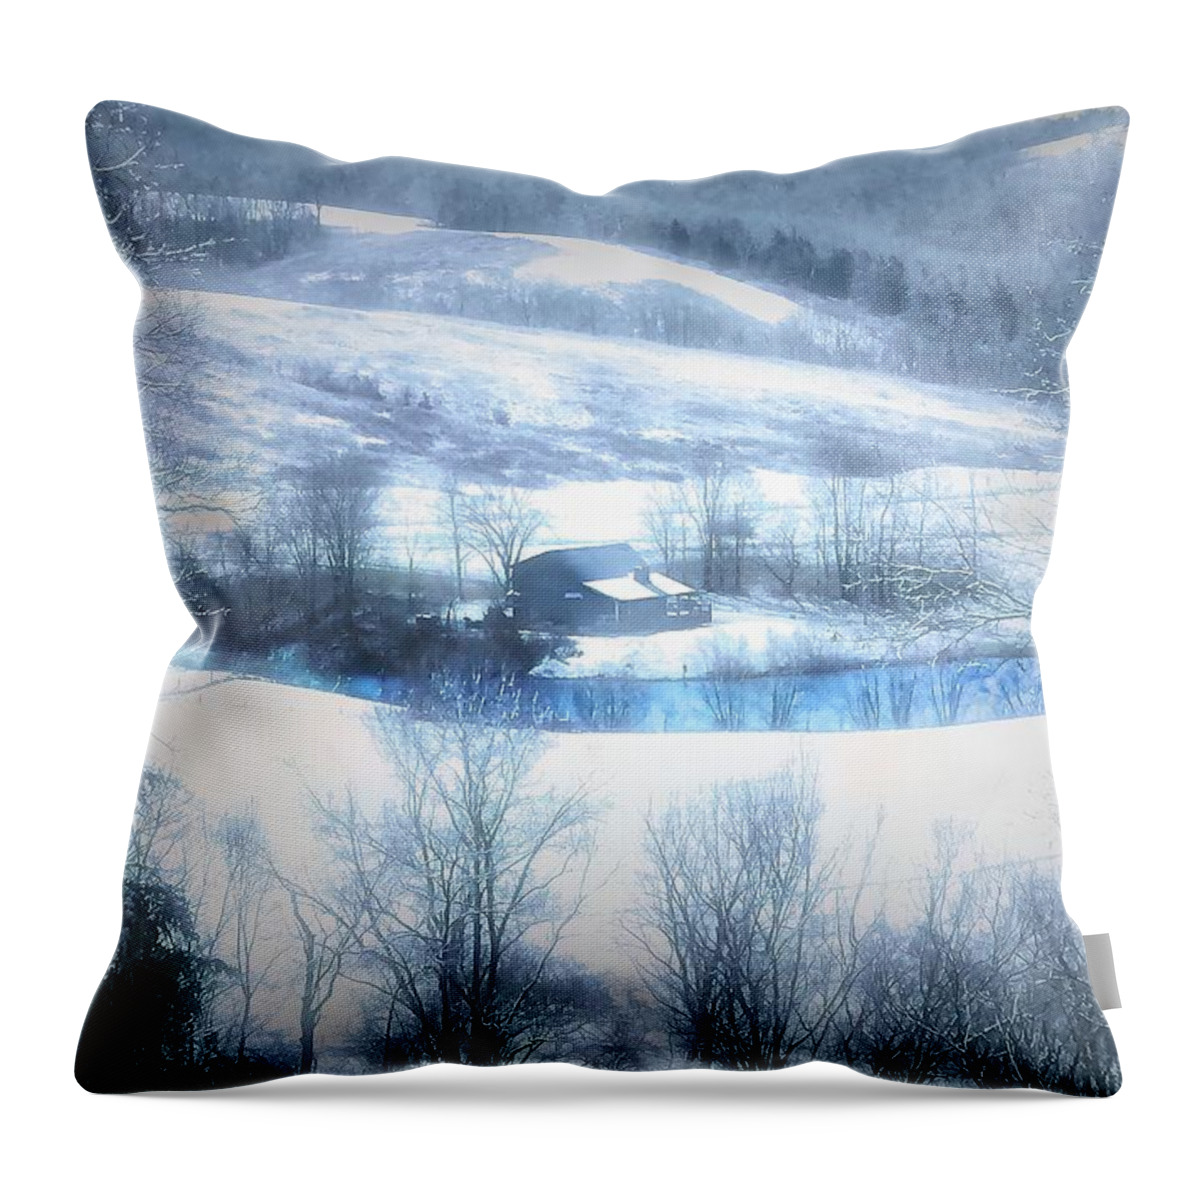  Throw Pillow featuring the photograph Cold Valley by Jack Wilson